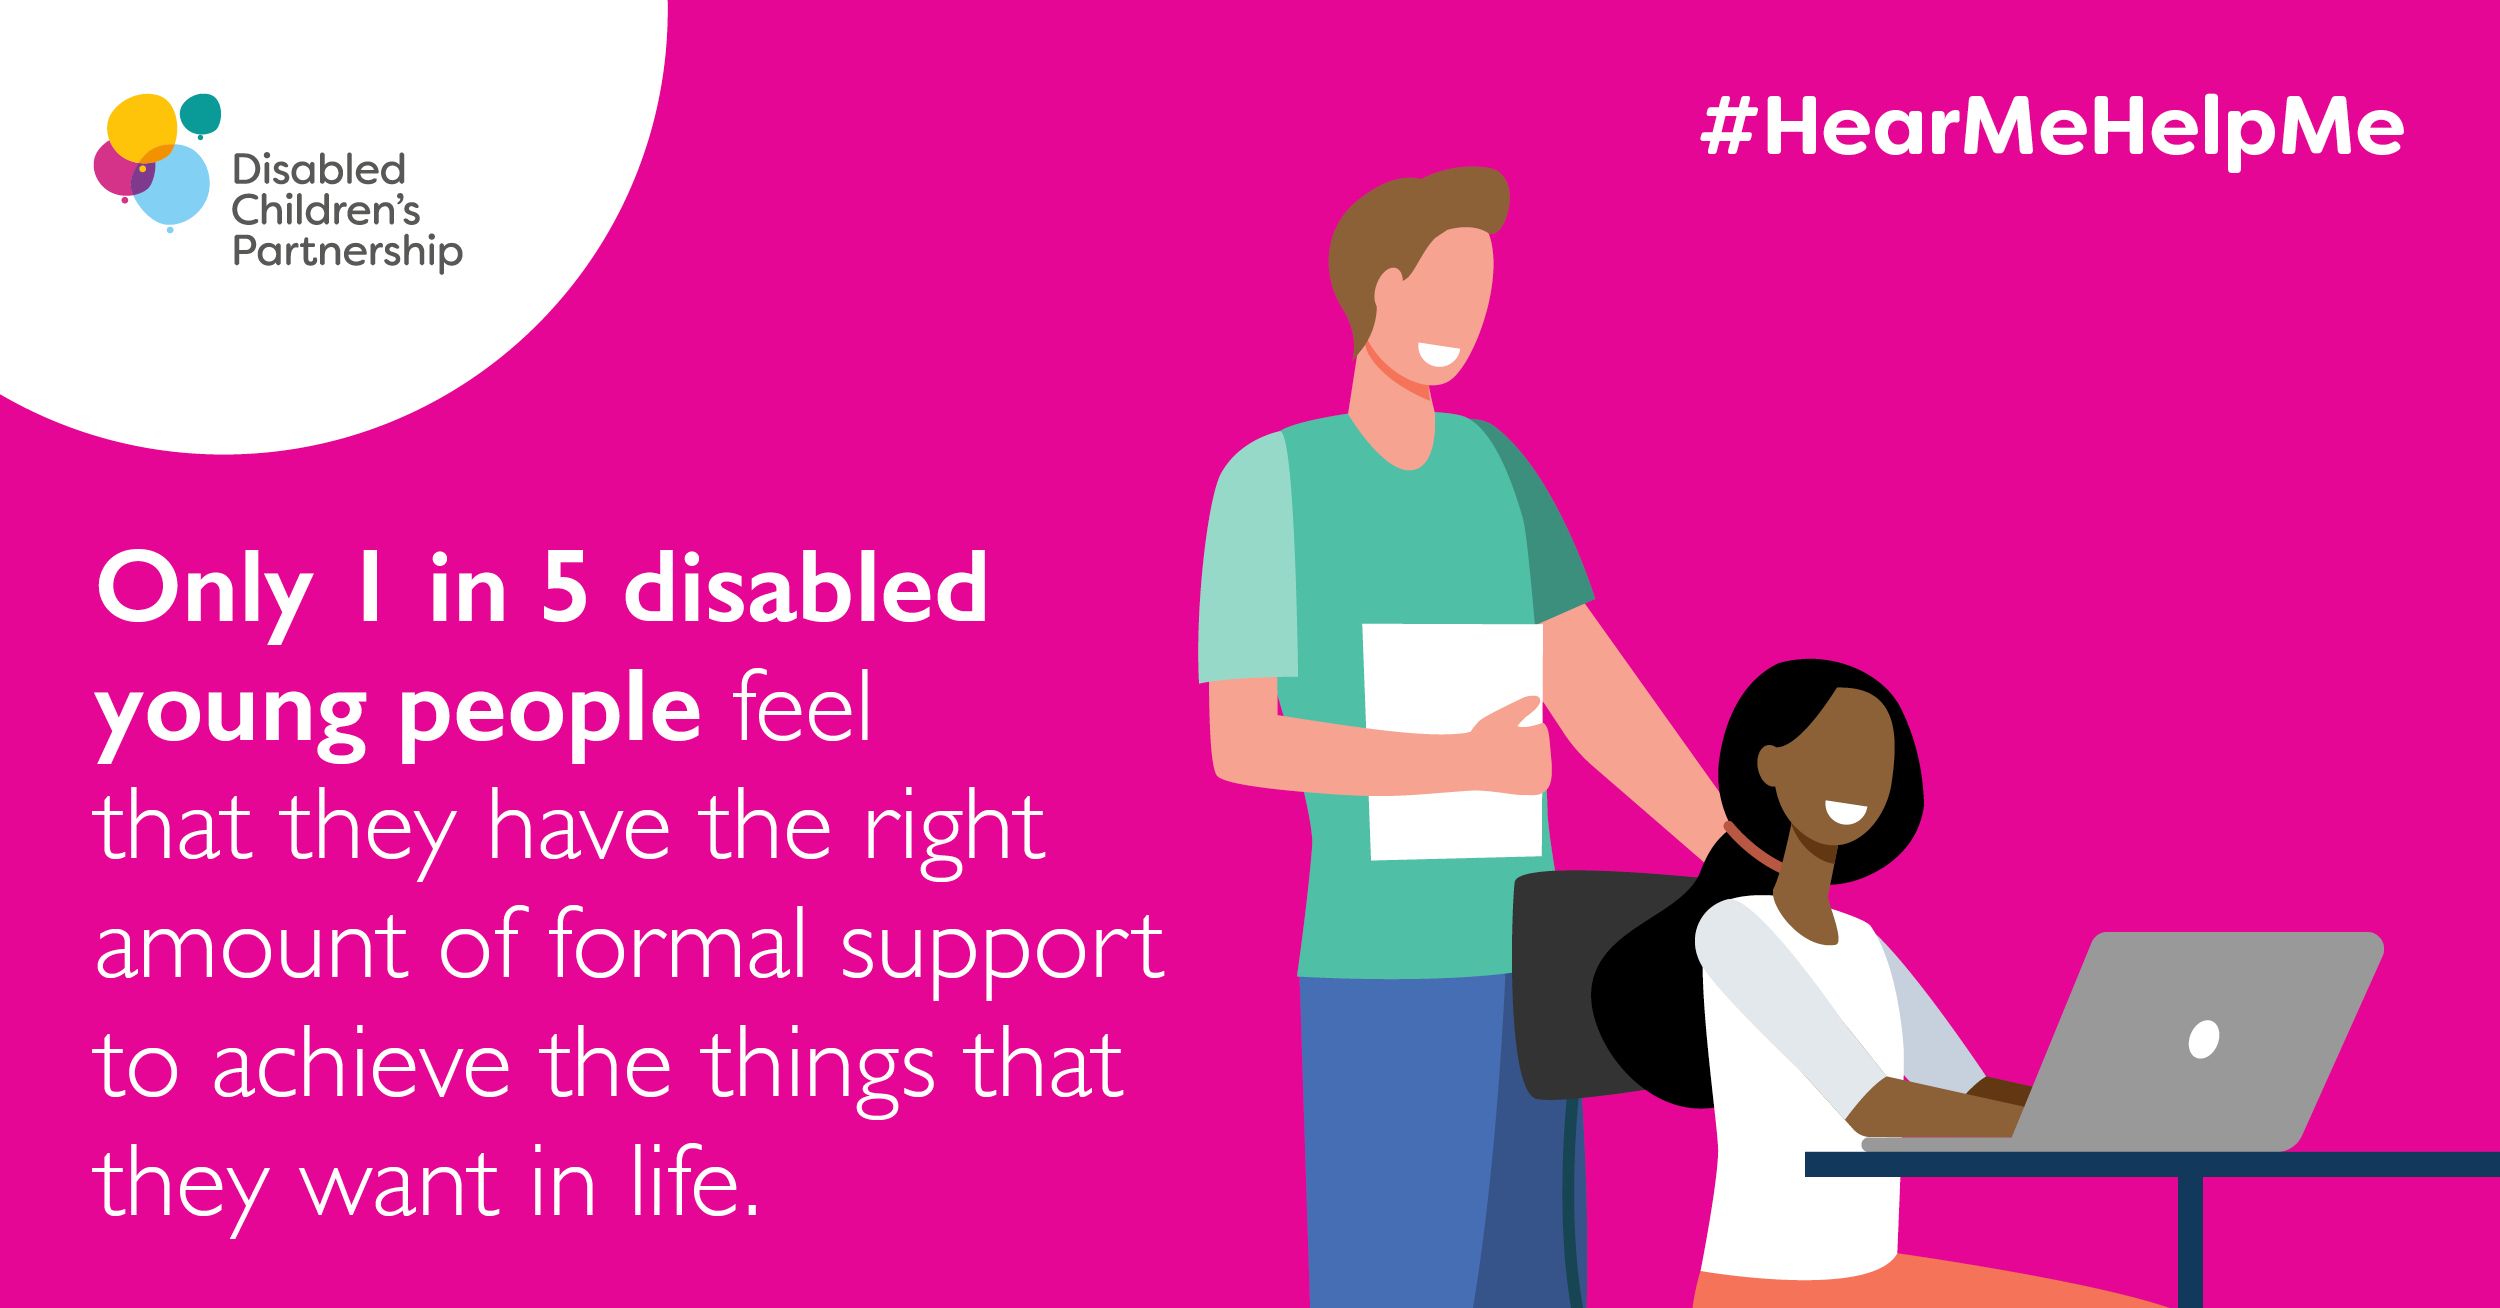 illustration showing just 1 in 5 disabled young people feel that they have the right amount of formal support to achieve the things that they want in life.